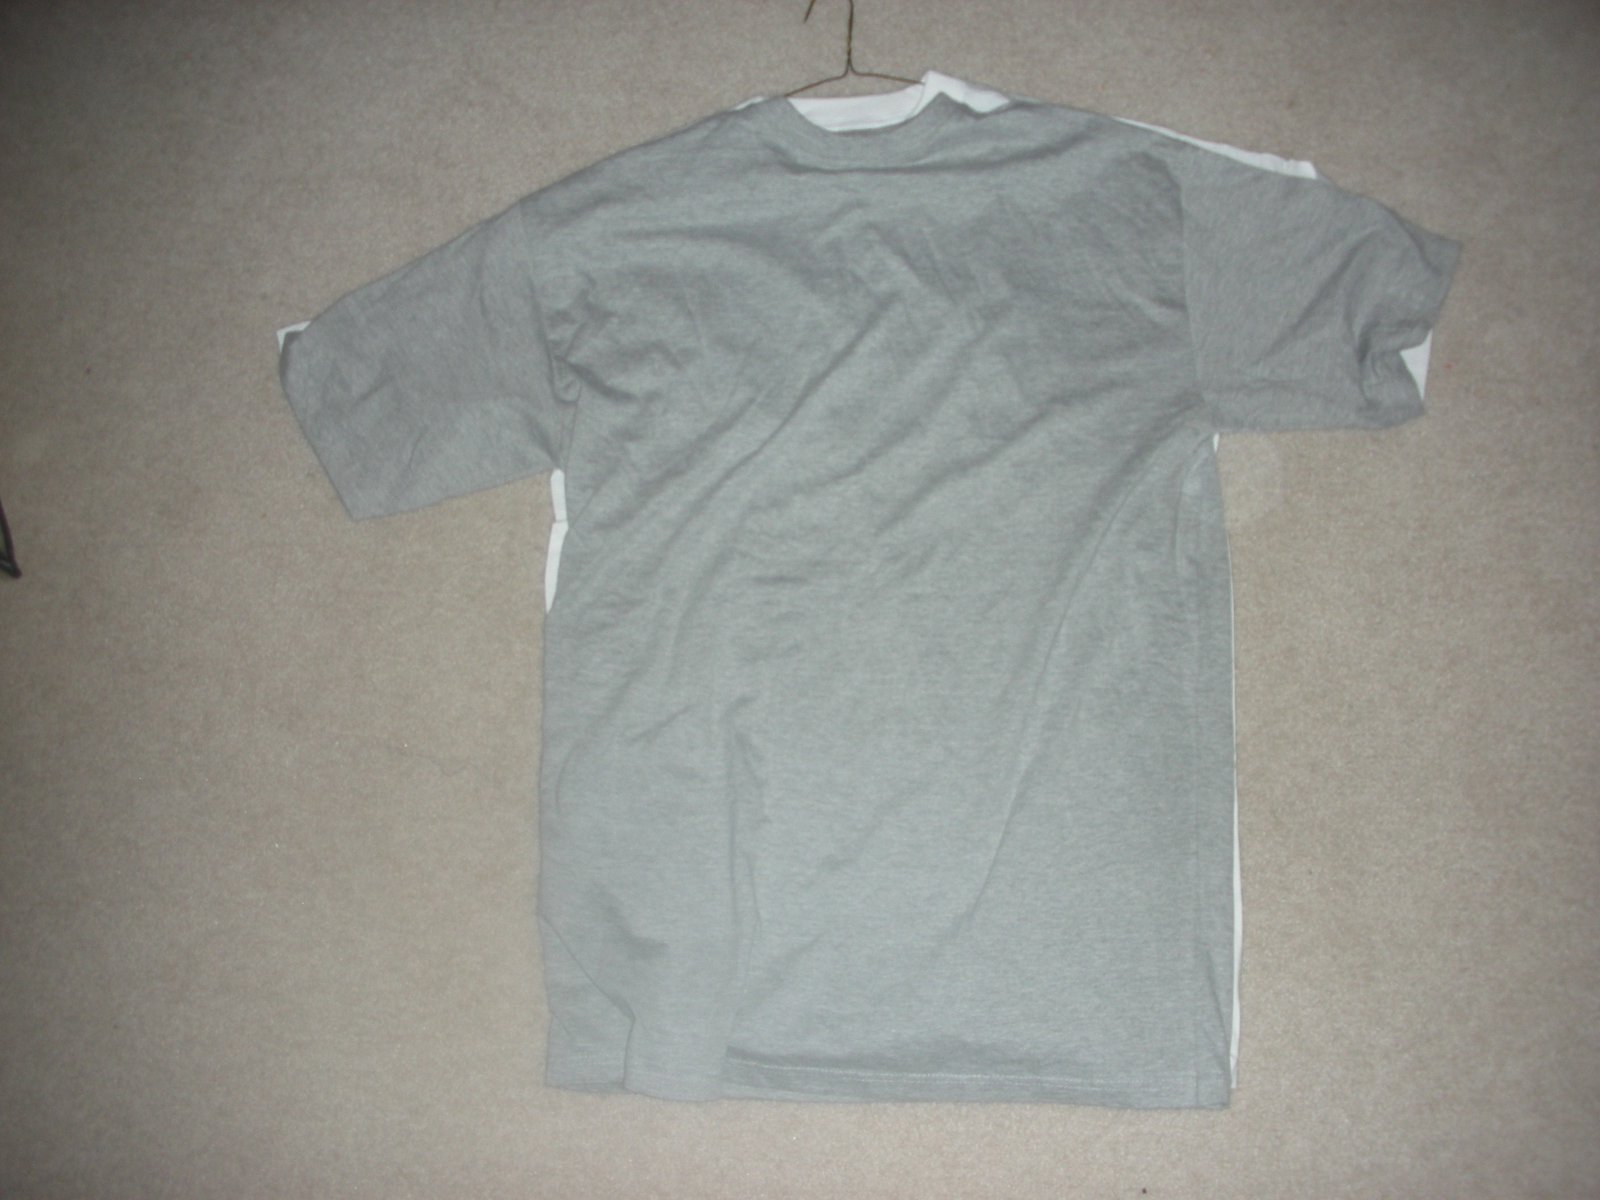 Grey 5XL available (33" in length)